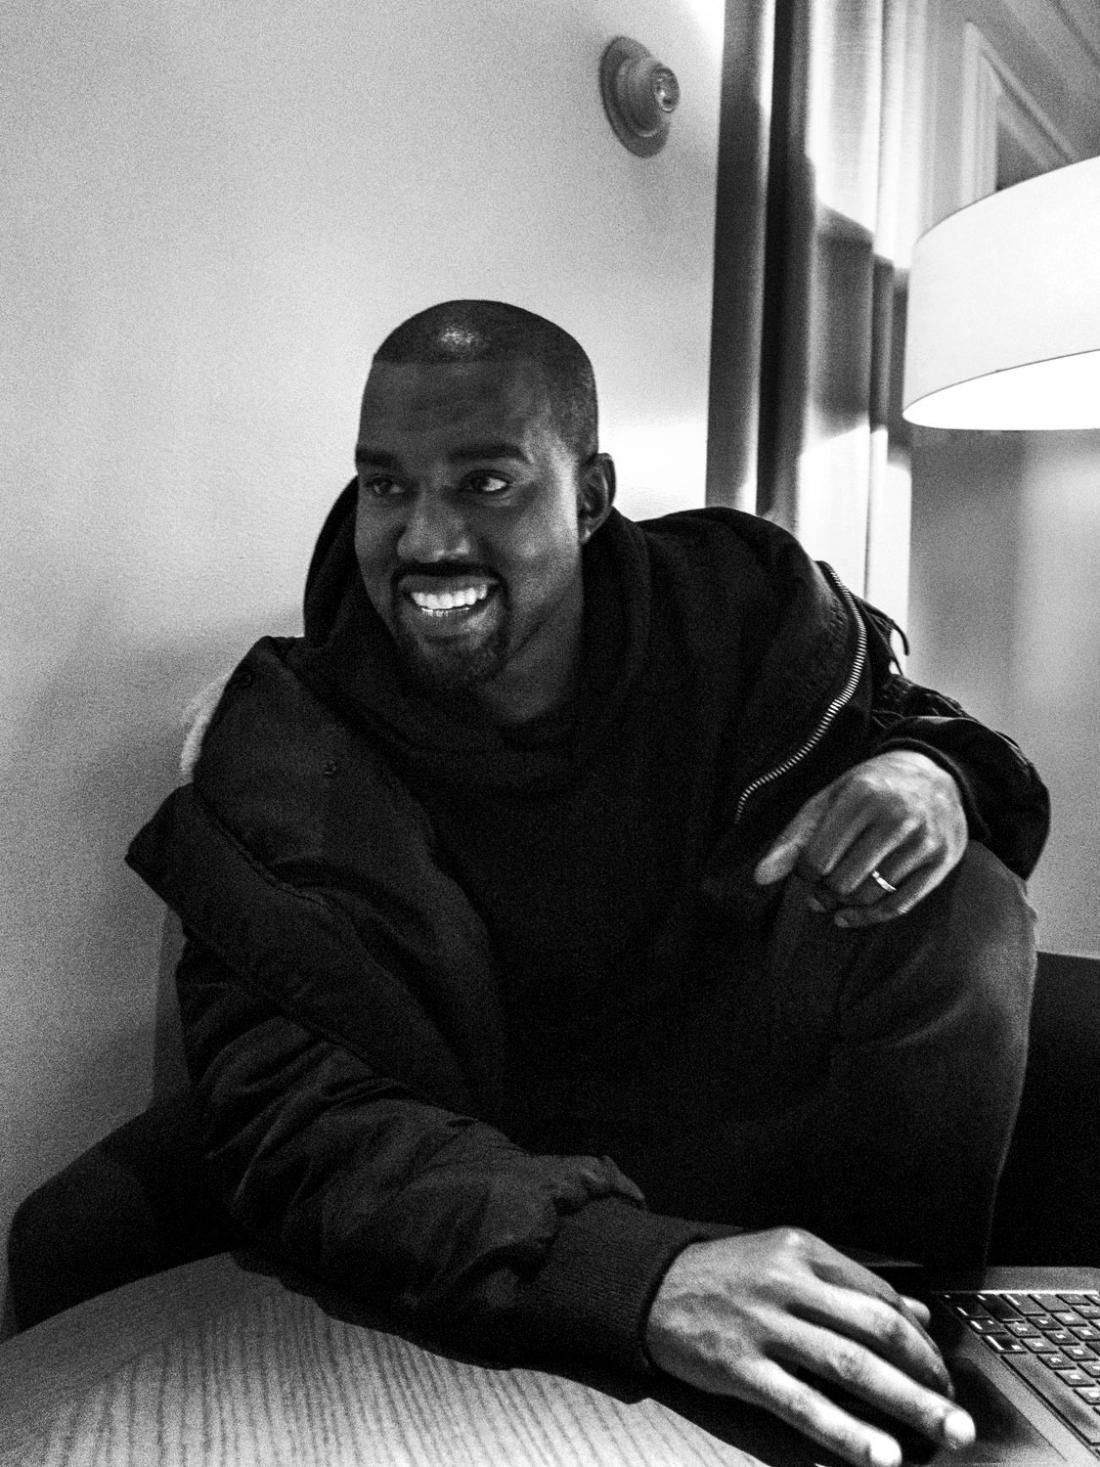 Kanye West Net Worth, Age, Height, Bio, Wiki, Weight, Wife, and Kids